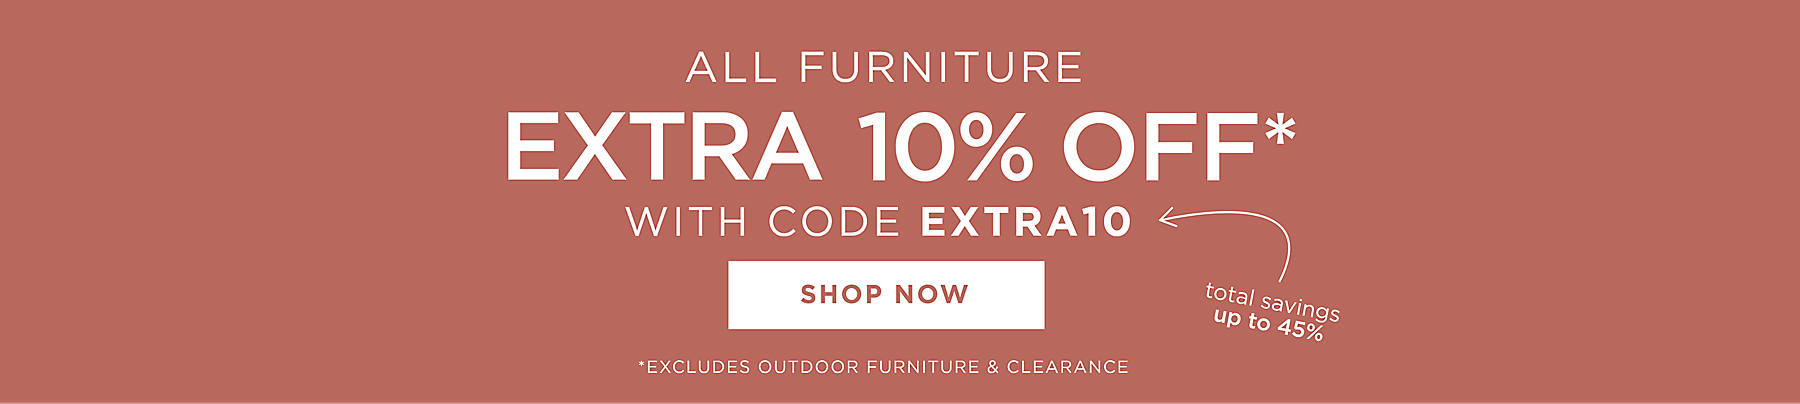 all furniture extra 10% off* with code EXTRA10 total savings up to 45% off shop now *excludes outdoor furniture & clearance